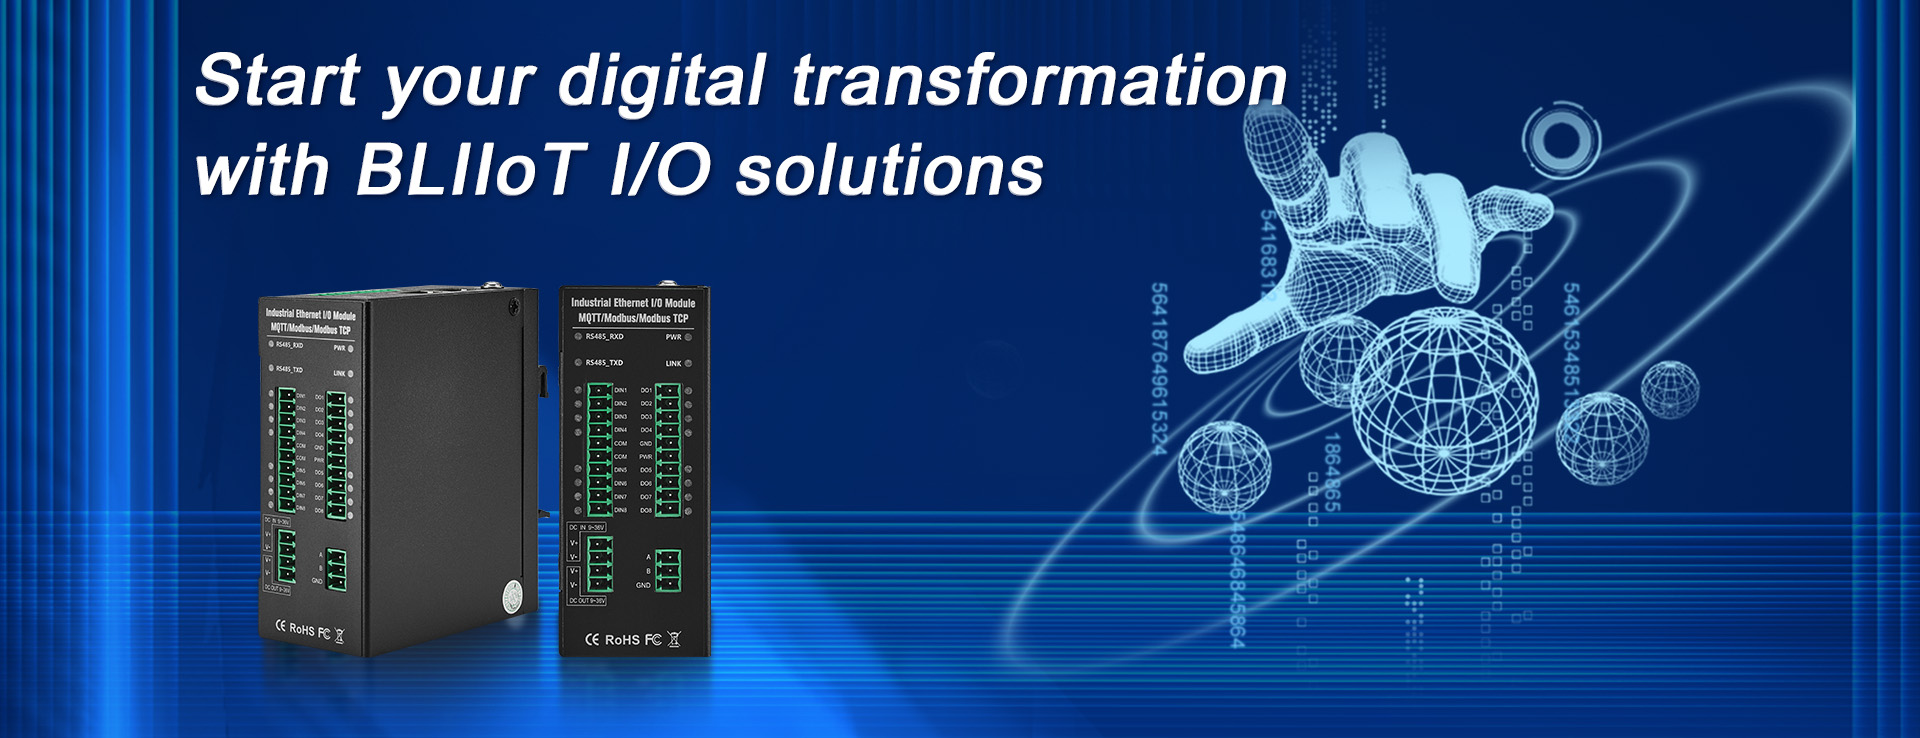 Start Your Digital Transformation with BLIIOT I/O Solutions